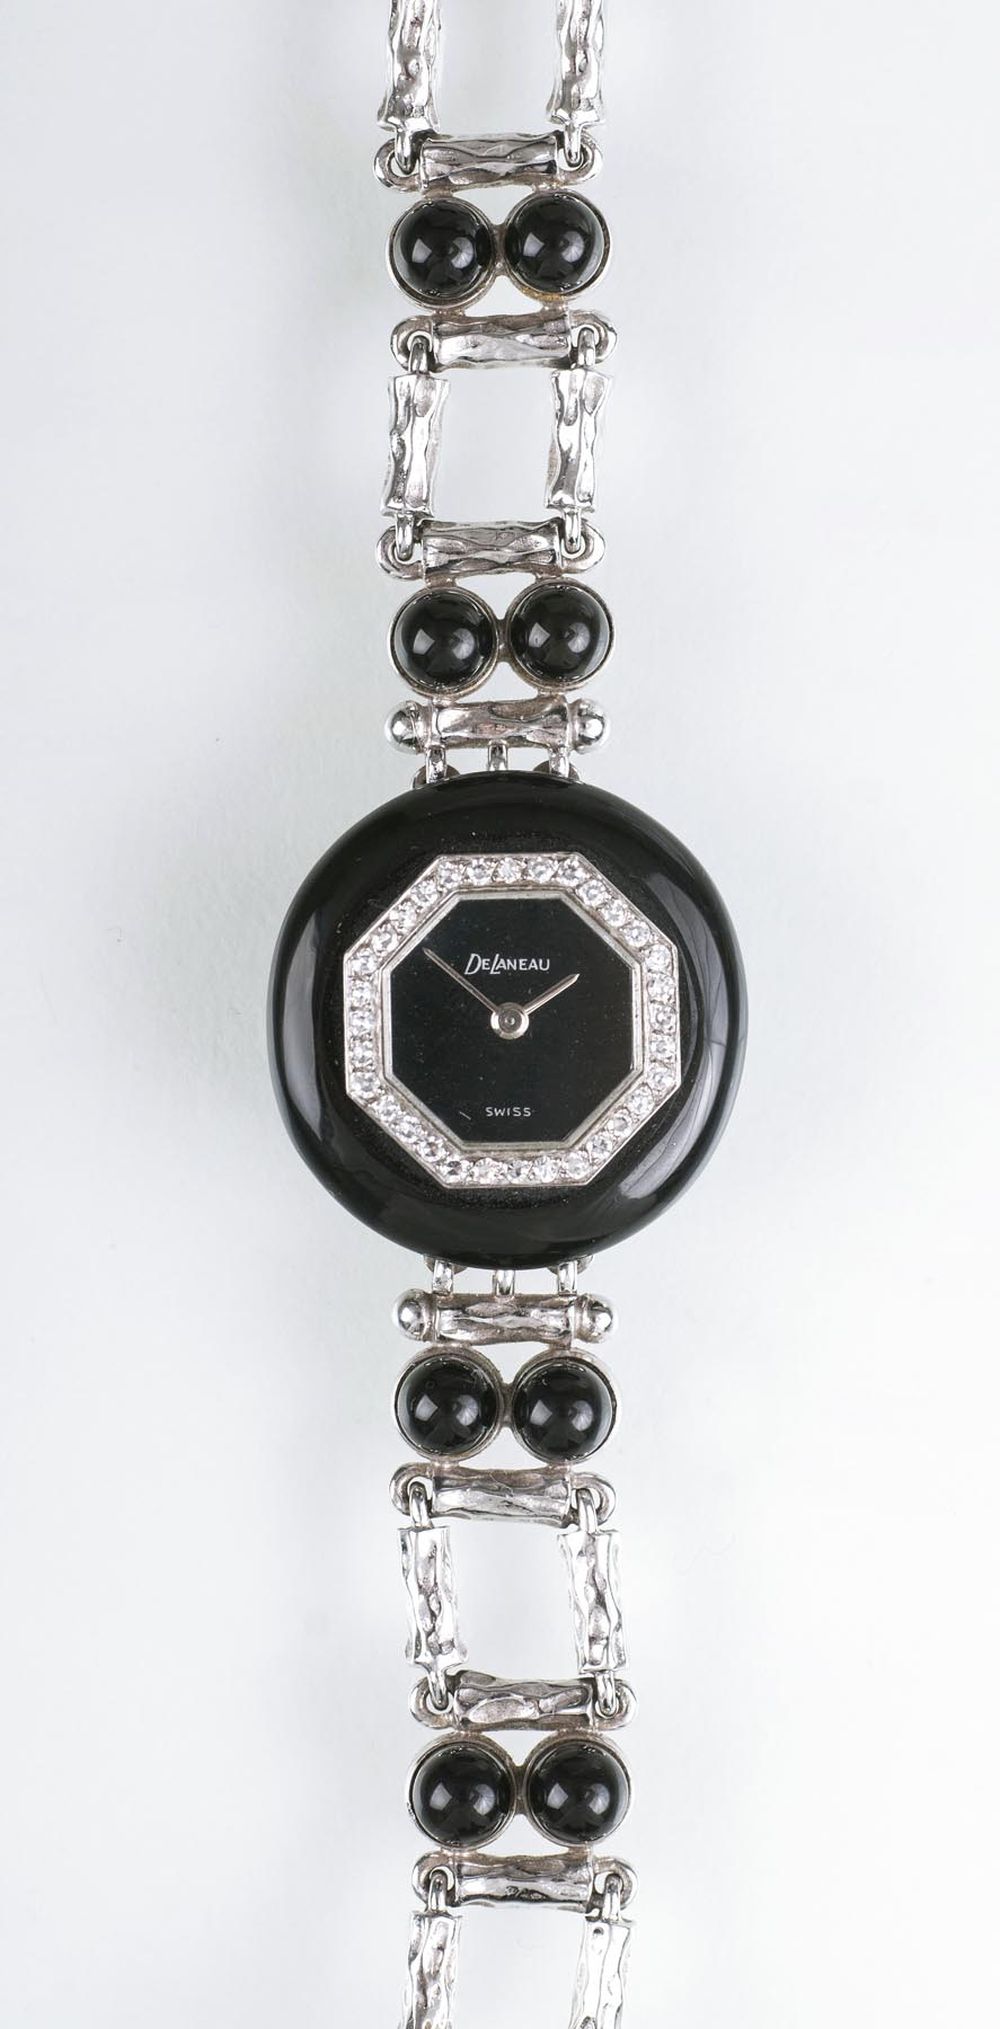 A Vintage Ladie's Wristwatch with onyx and diamonds by Jeweller Wilm